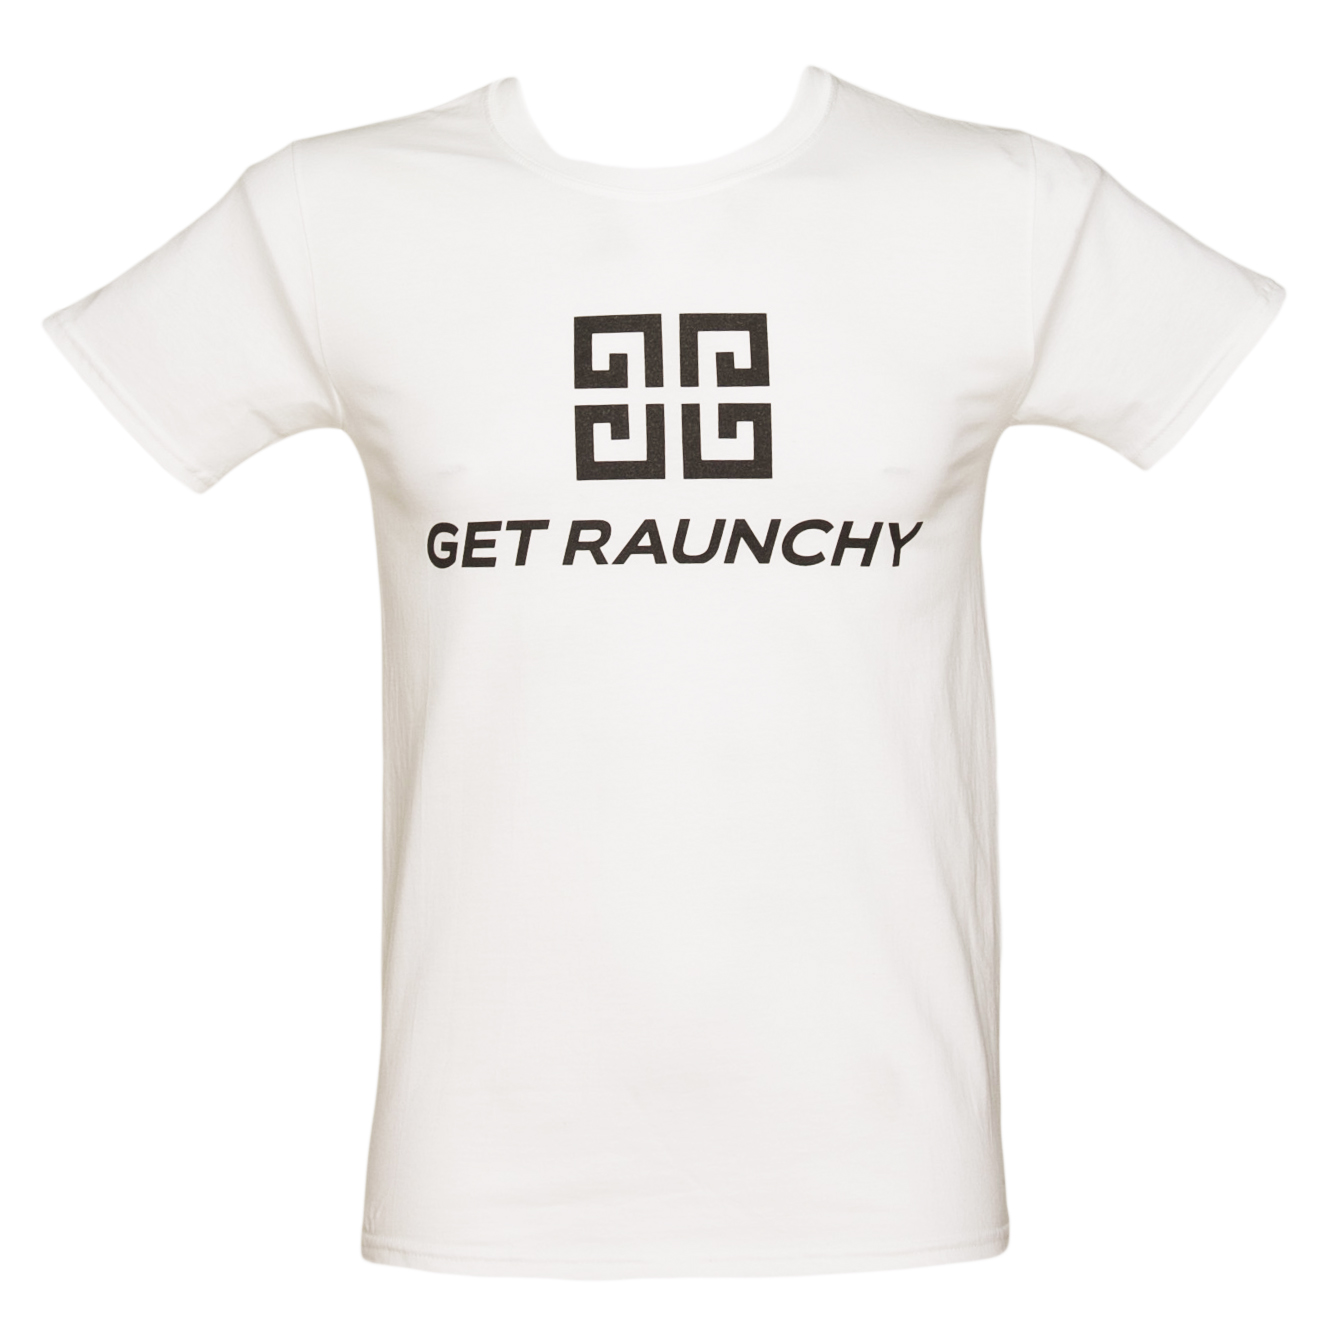 Mens White Get Raunchy Parody T-Shirt from